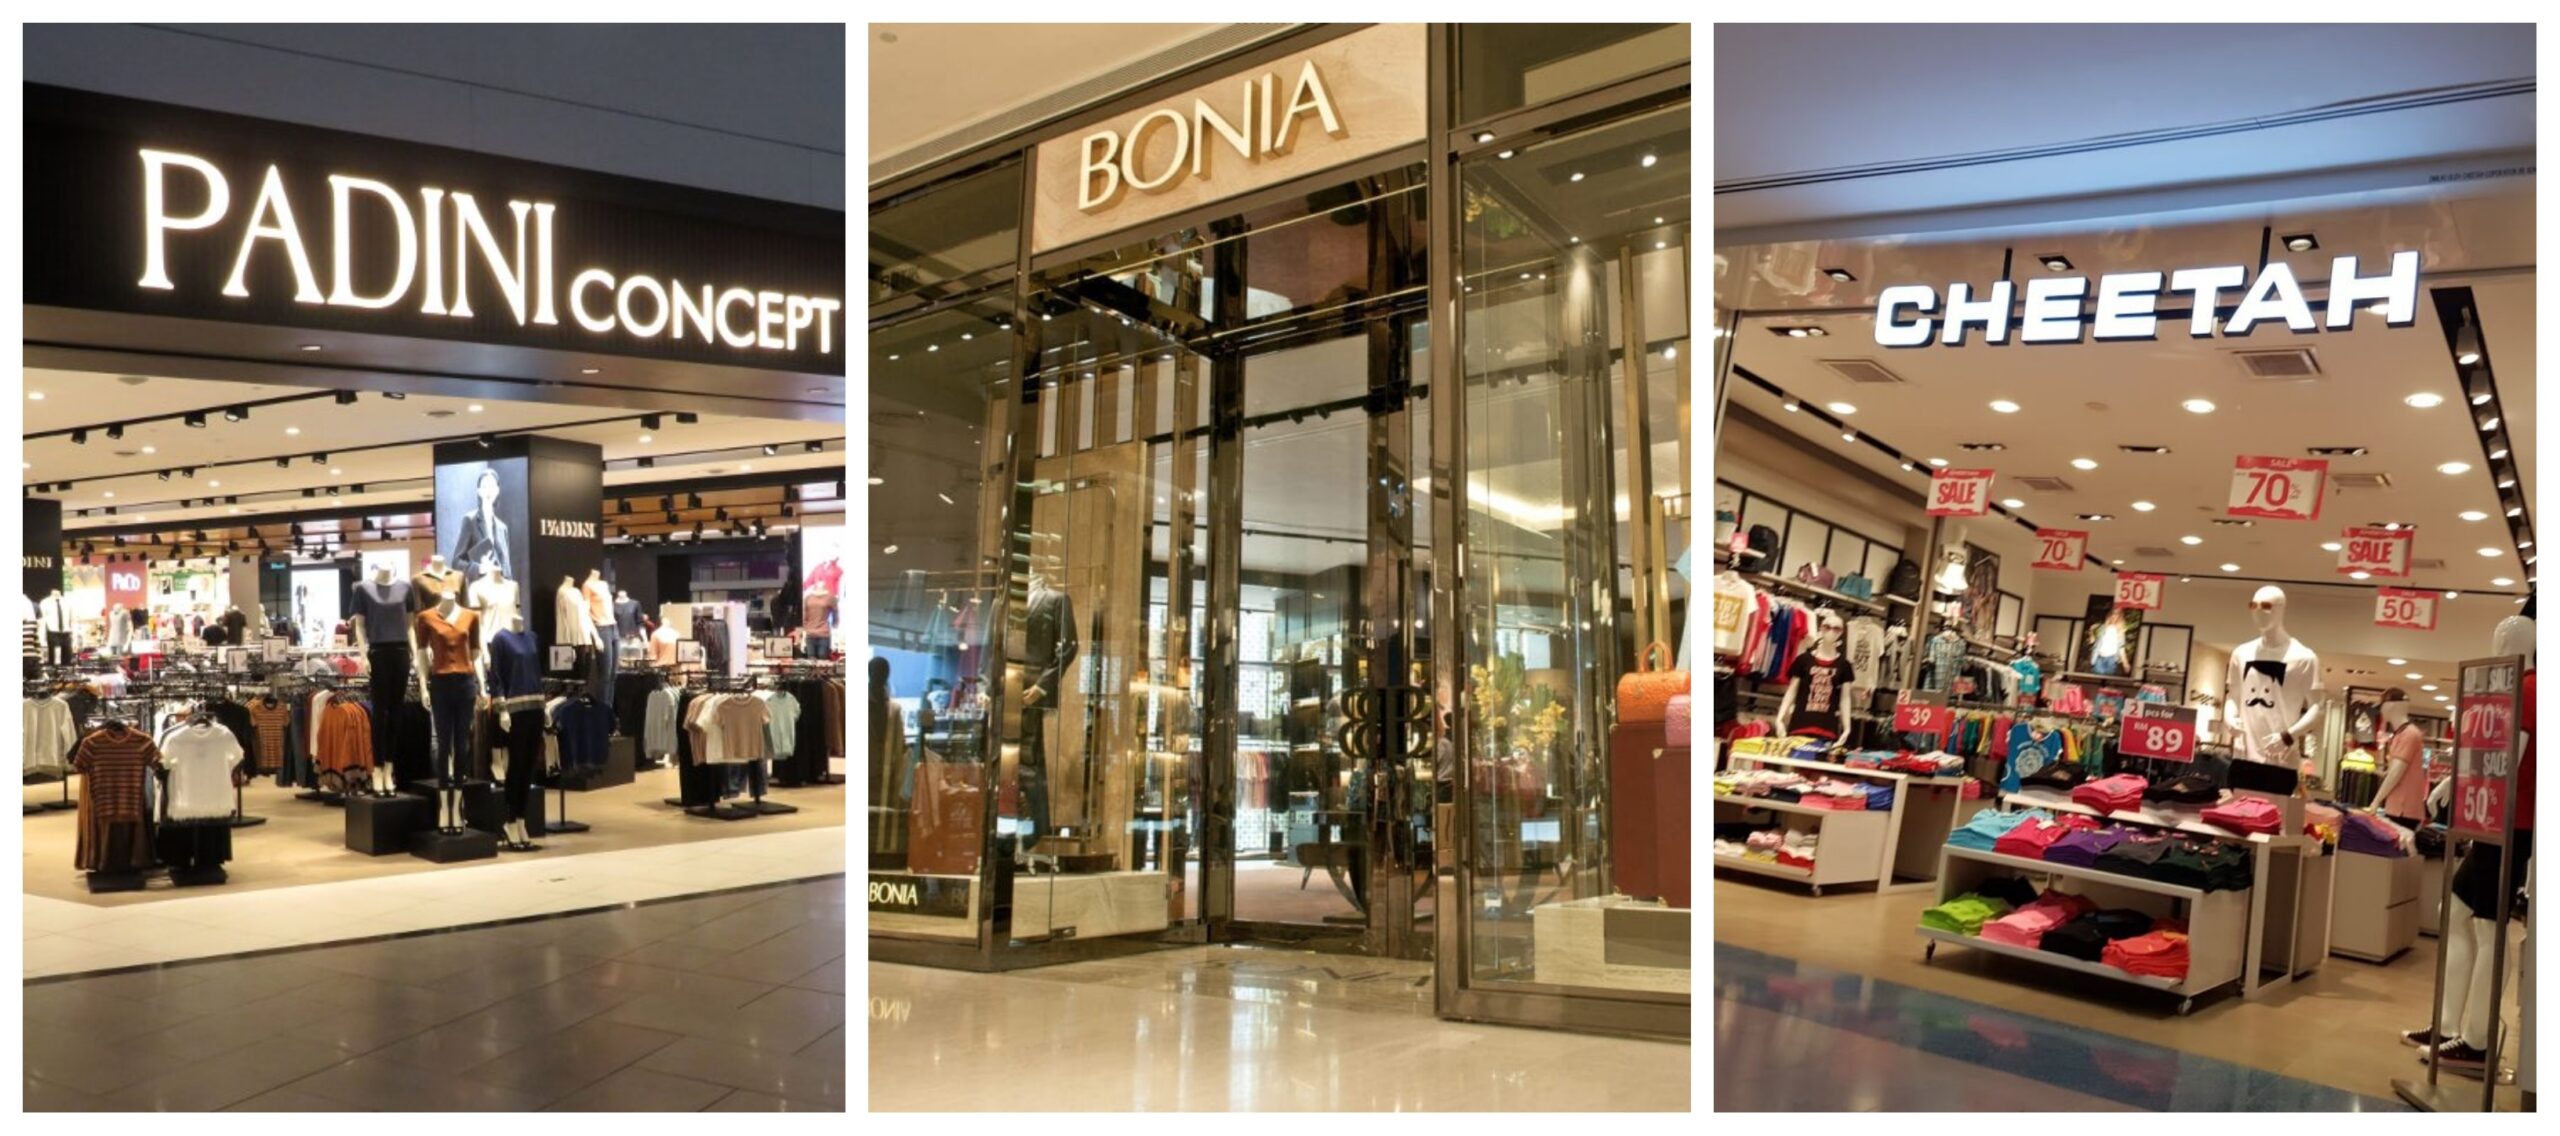 Fashion and art come together at BONIA's new flagship Suria KLCC store